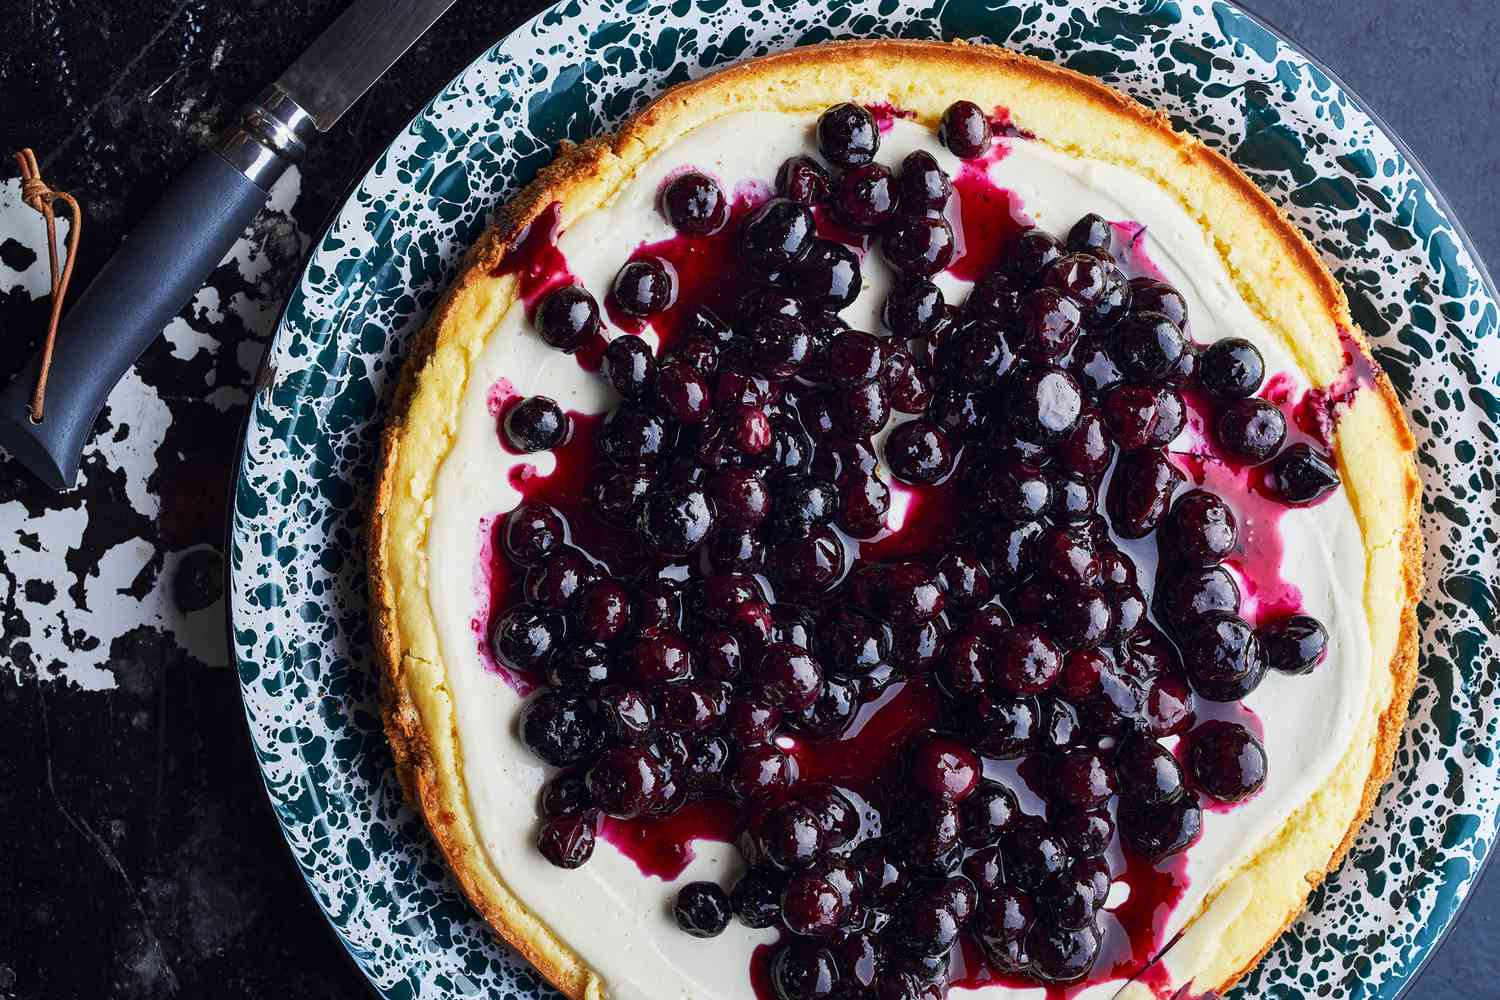 How to Make a Stunning, No-Fuss Berry-Topped Cheesecake